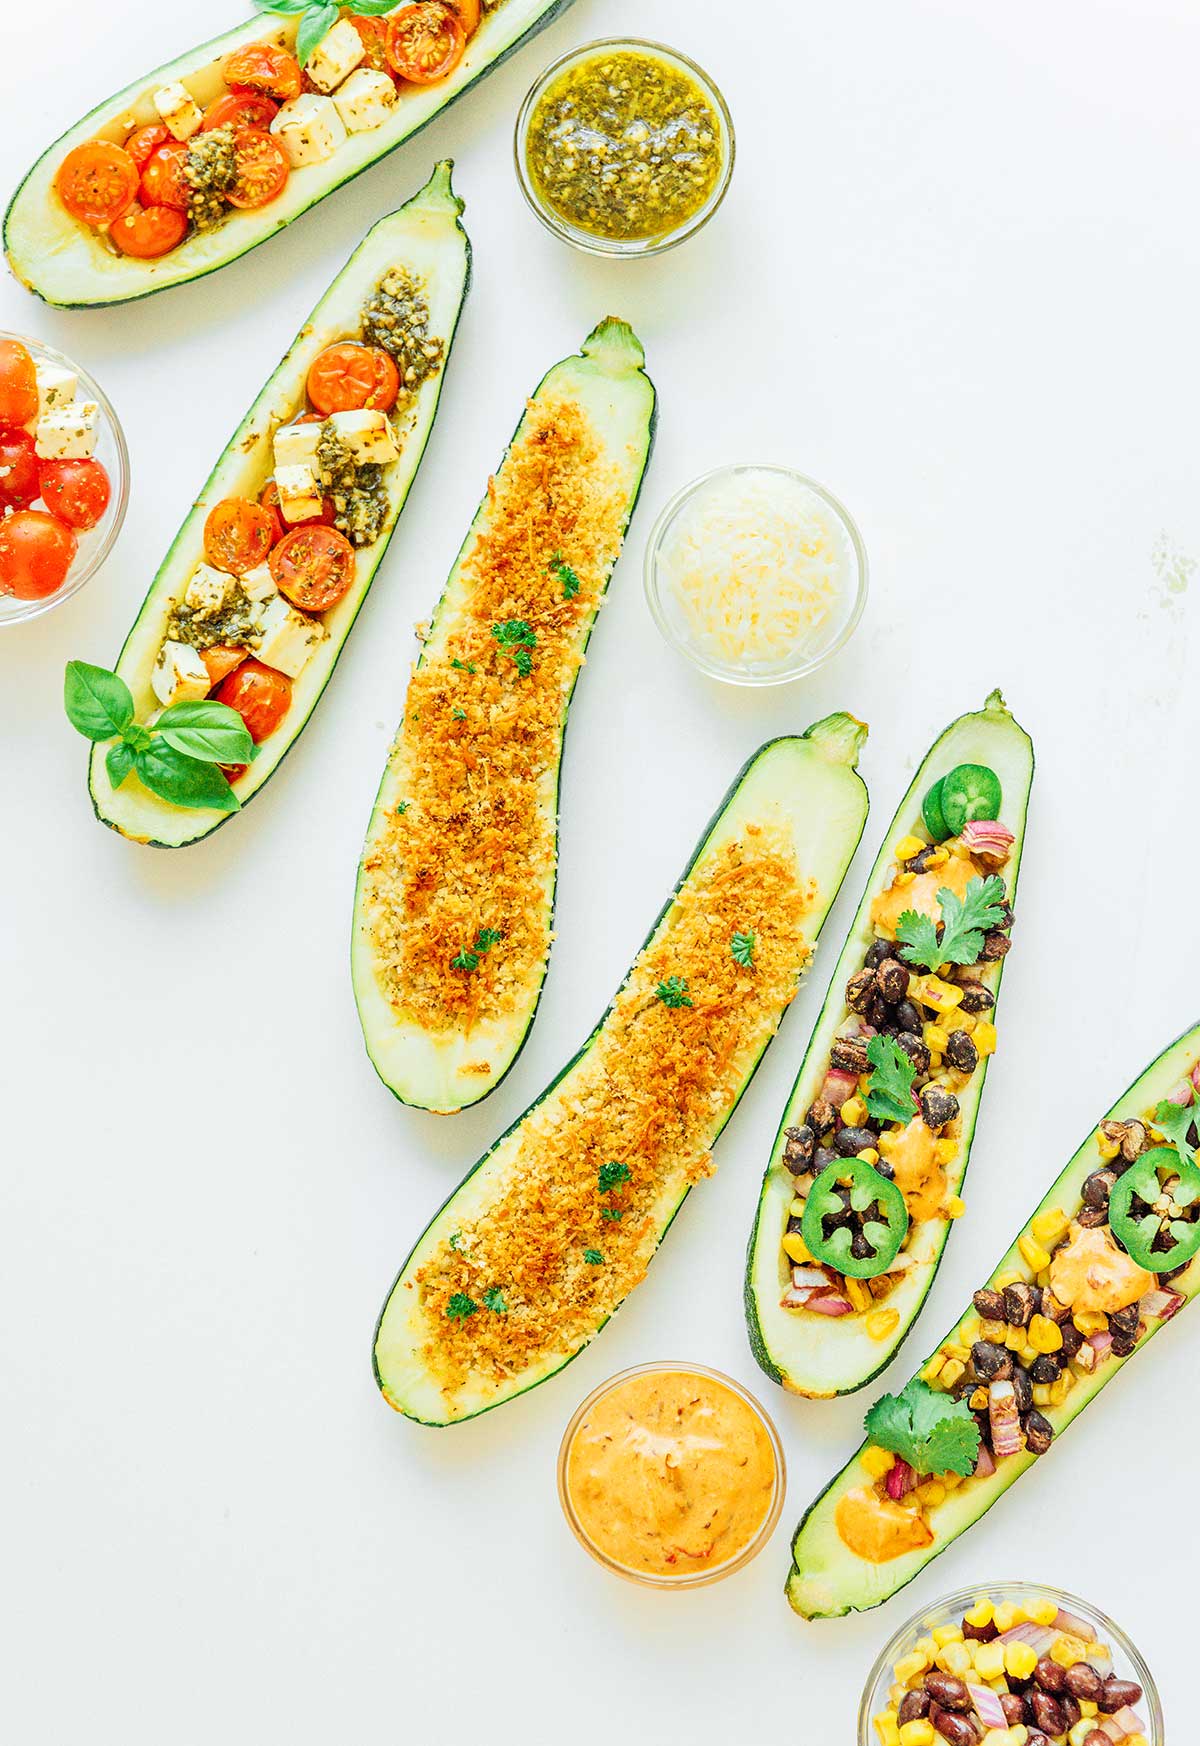 Six stuffed zucchini halves arranged on a white background and surrounded by small bowls of various toppings